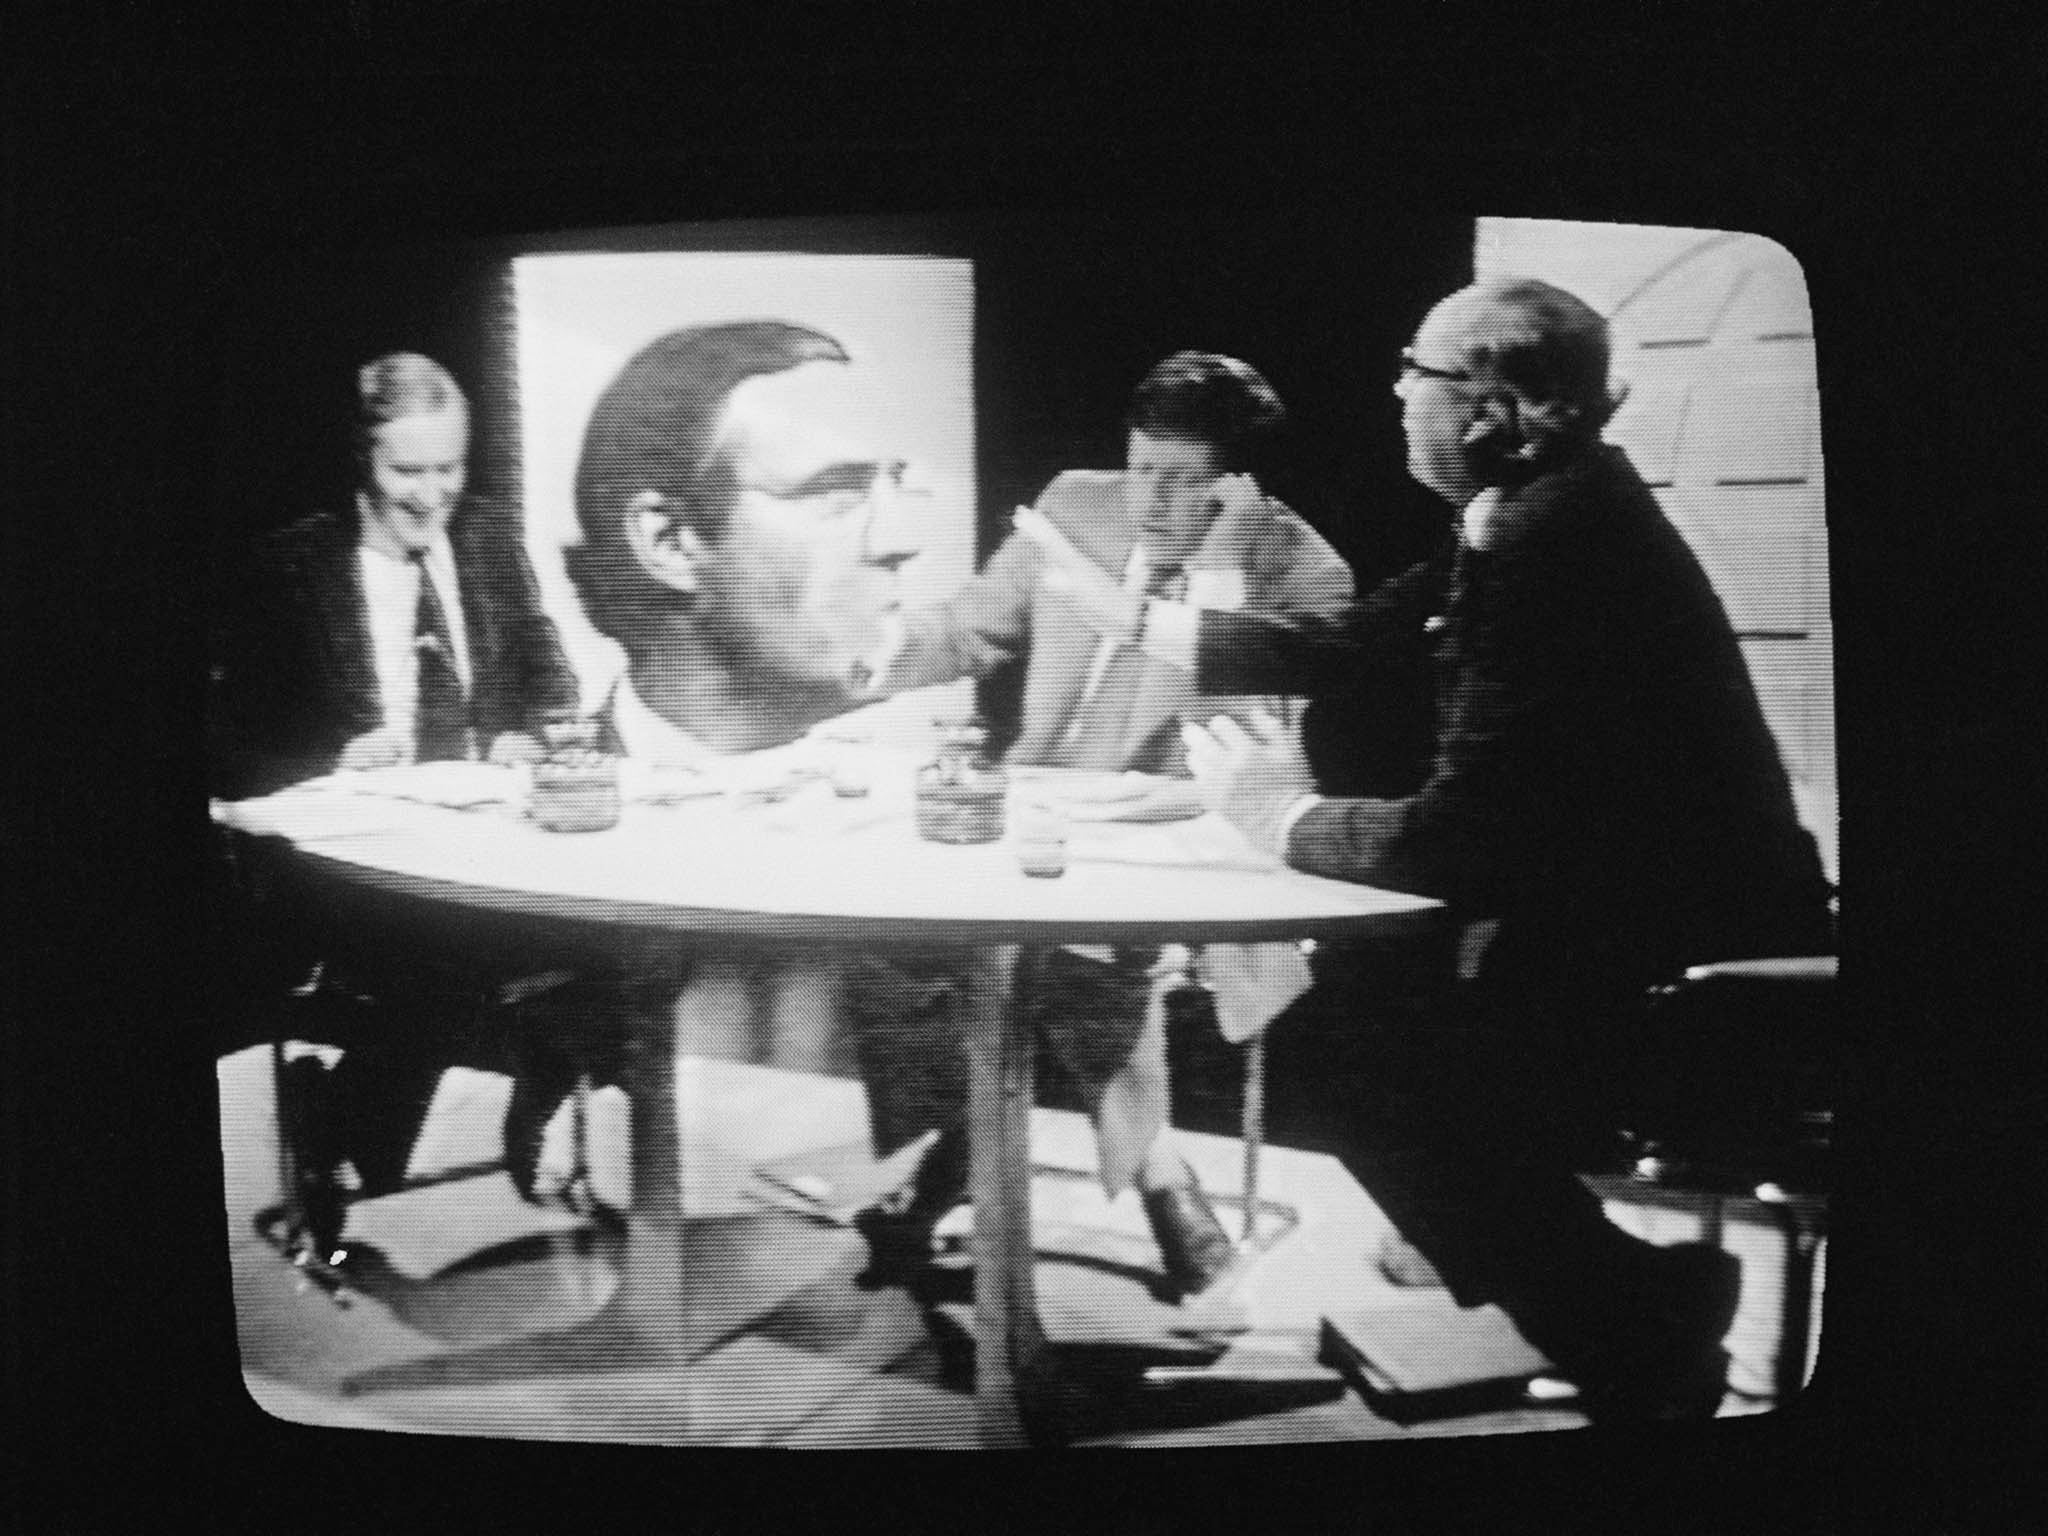 David Dimbleby adjudicates as Tony Benn (left) and Roy Jenkins (right) debate about the European Economic Community on a 1975 BBC ‘Panorama’ referendum special